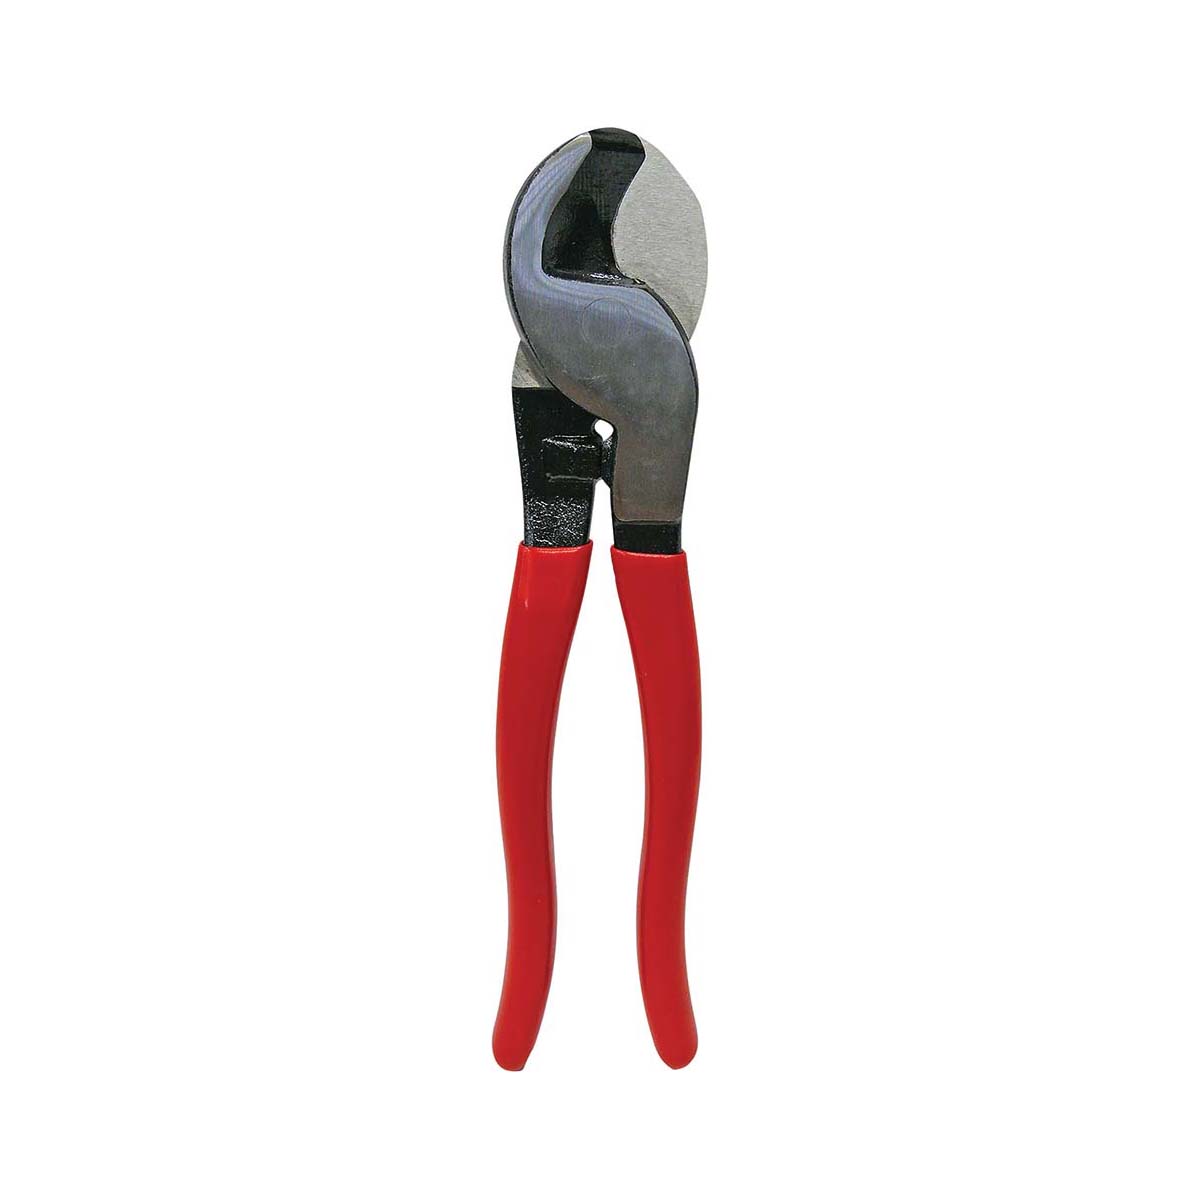 KT Cables Cable Cutter